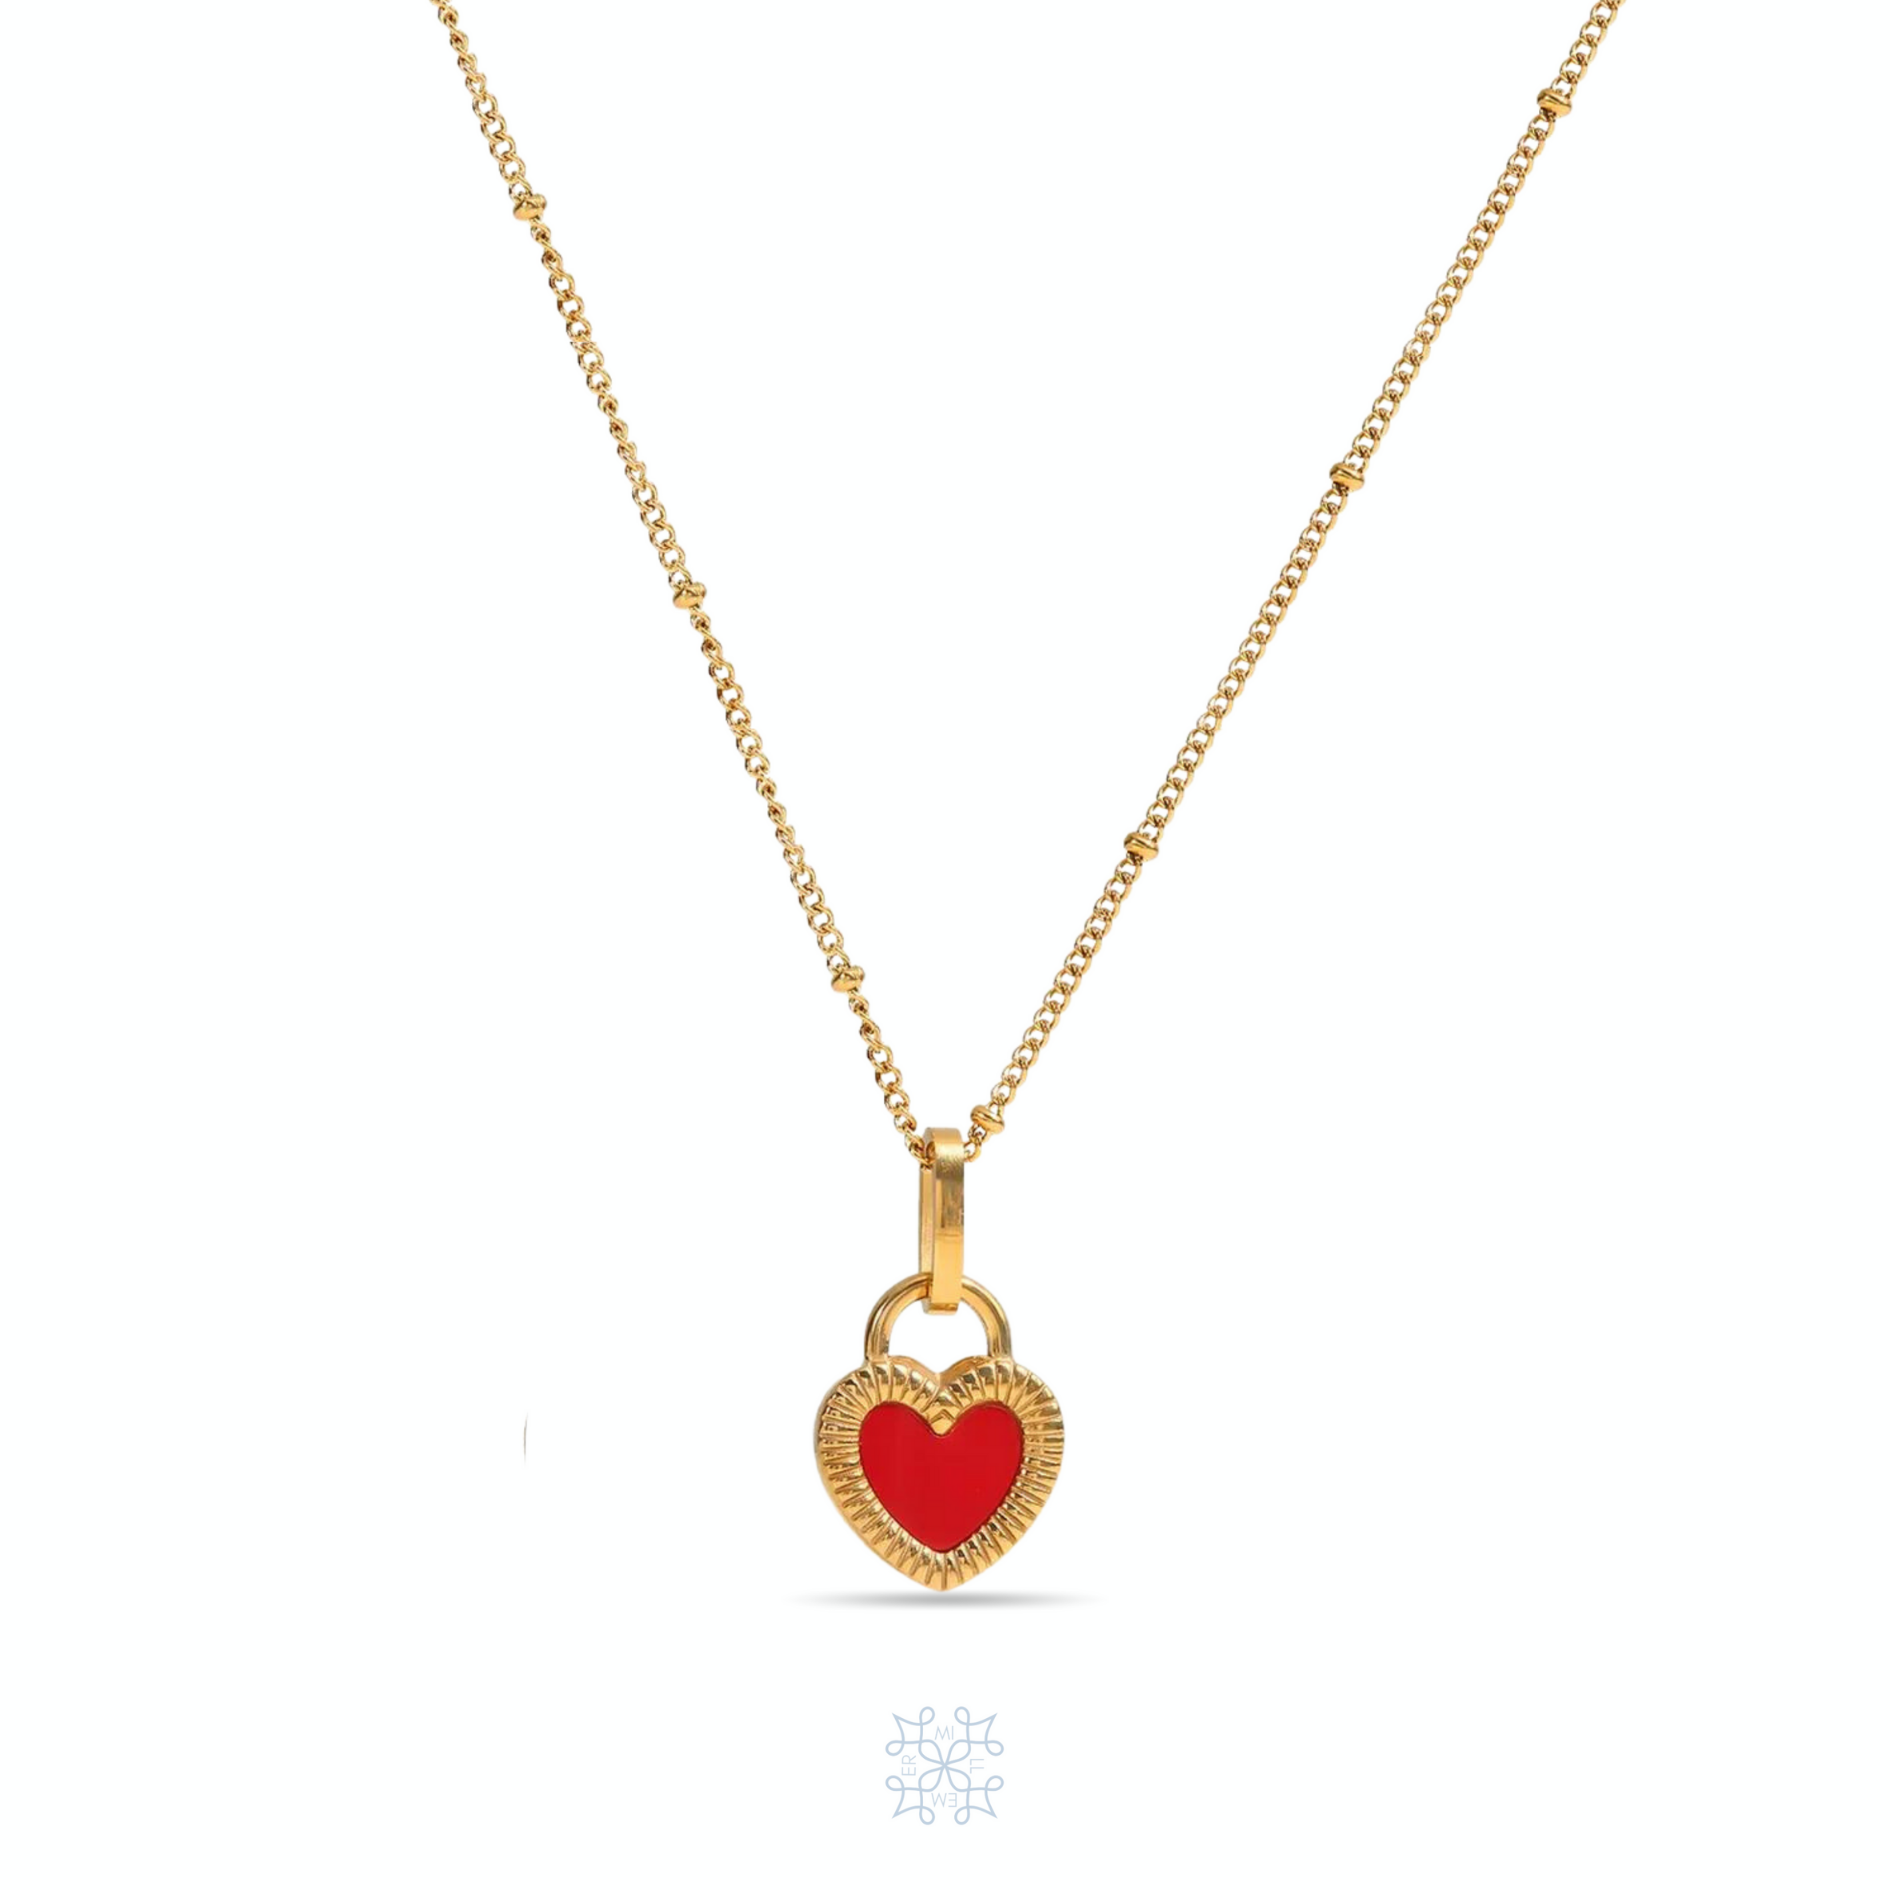 ARIEL Heart Peandant Gold Necklace. Red and white heart. One side of the pendant is red the other one is white. It can be worn at both sides. Gold dainty chain necklace with a heart pendant.